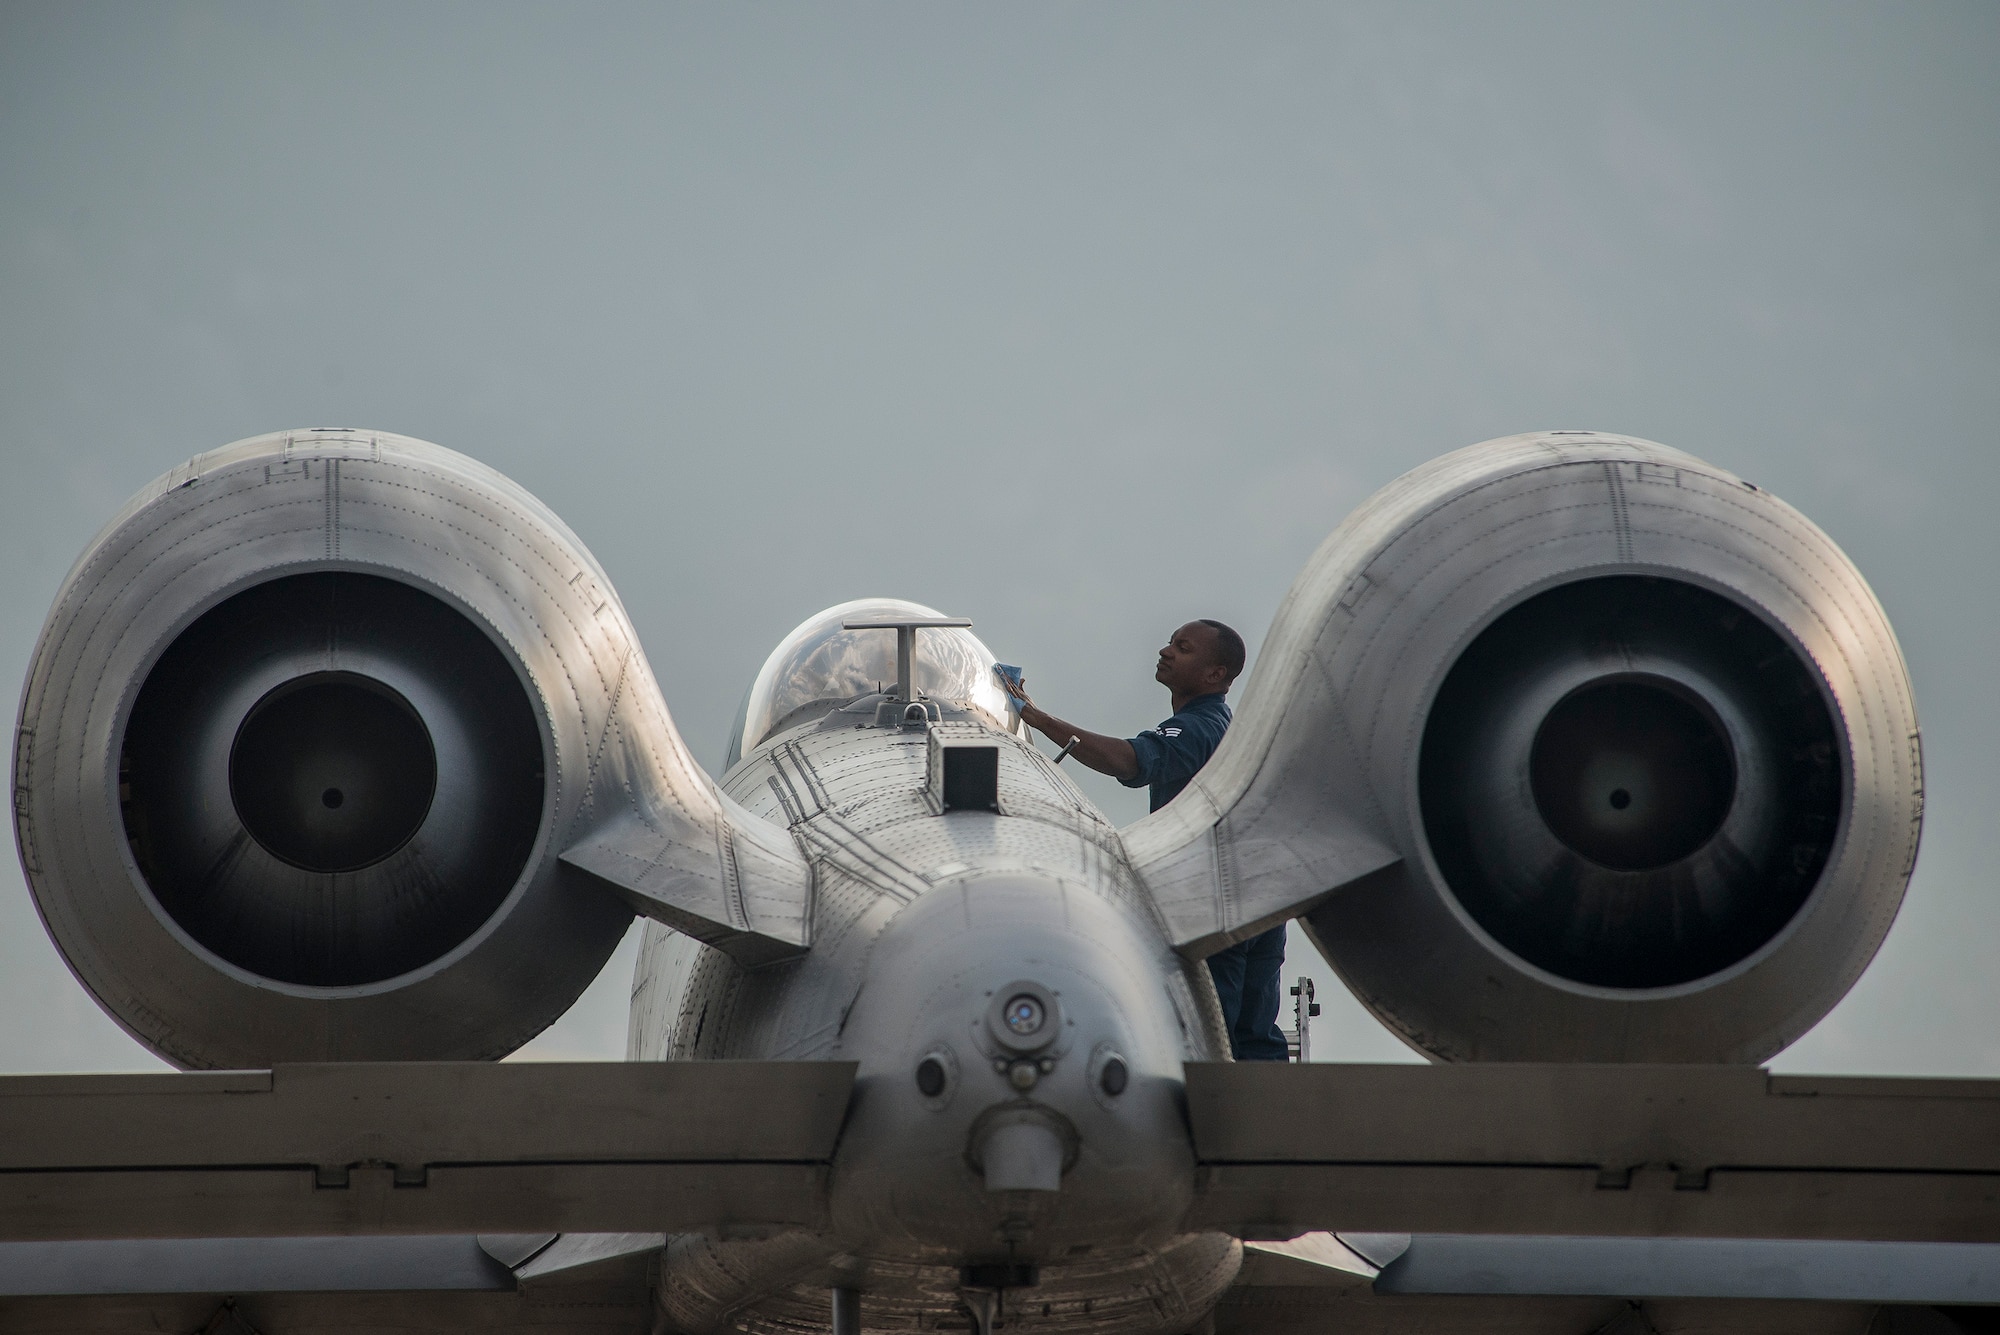 Senior Airman Lavonce Soles, 23rd Aircraft Maintenance Squadron, Moody Air Force Base, Ga., cleans the canopy on an A-10 Thunderbolt II aircraft before flight Aug. 3 at Hill AFB. Moody Airmen and aircraft are at Hill participating in a combat exercise known as Combat Hammer. (U.S. Air Force photo by Paul Holcomb)